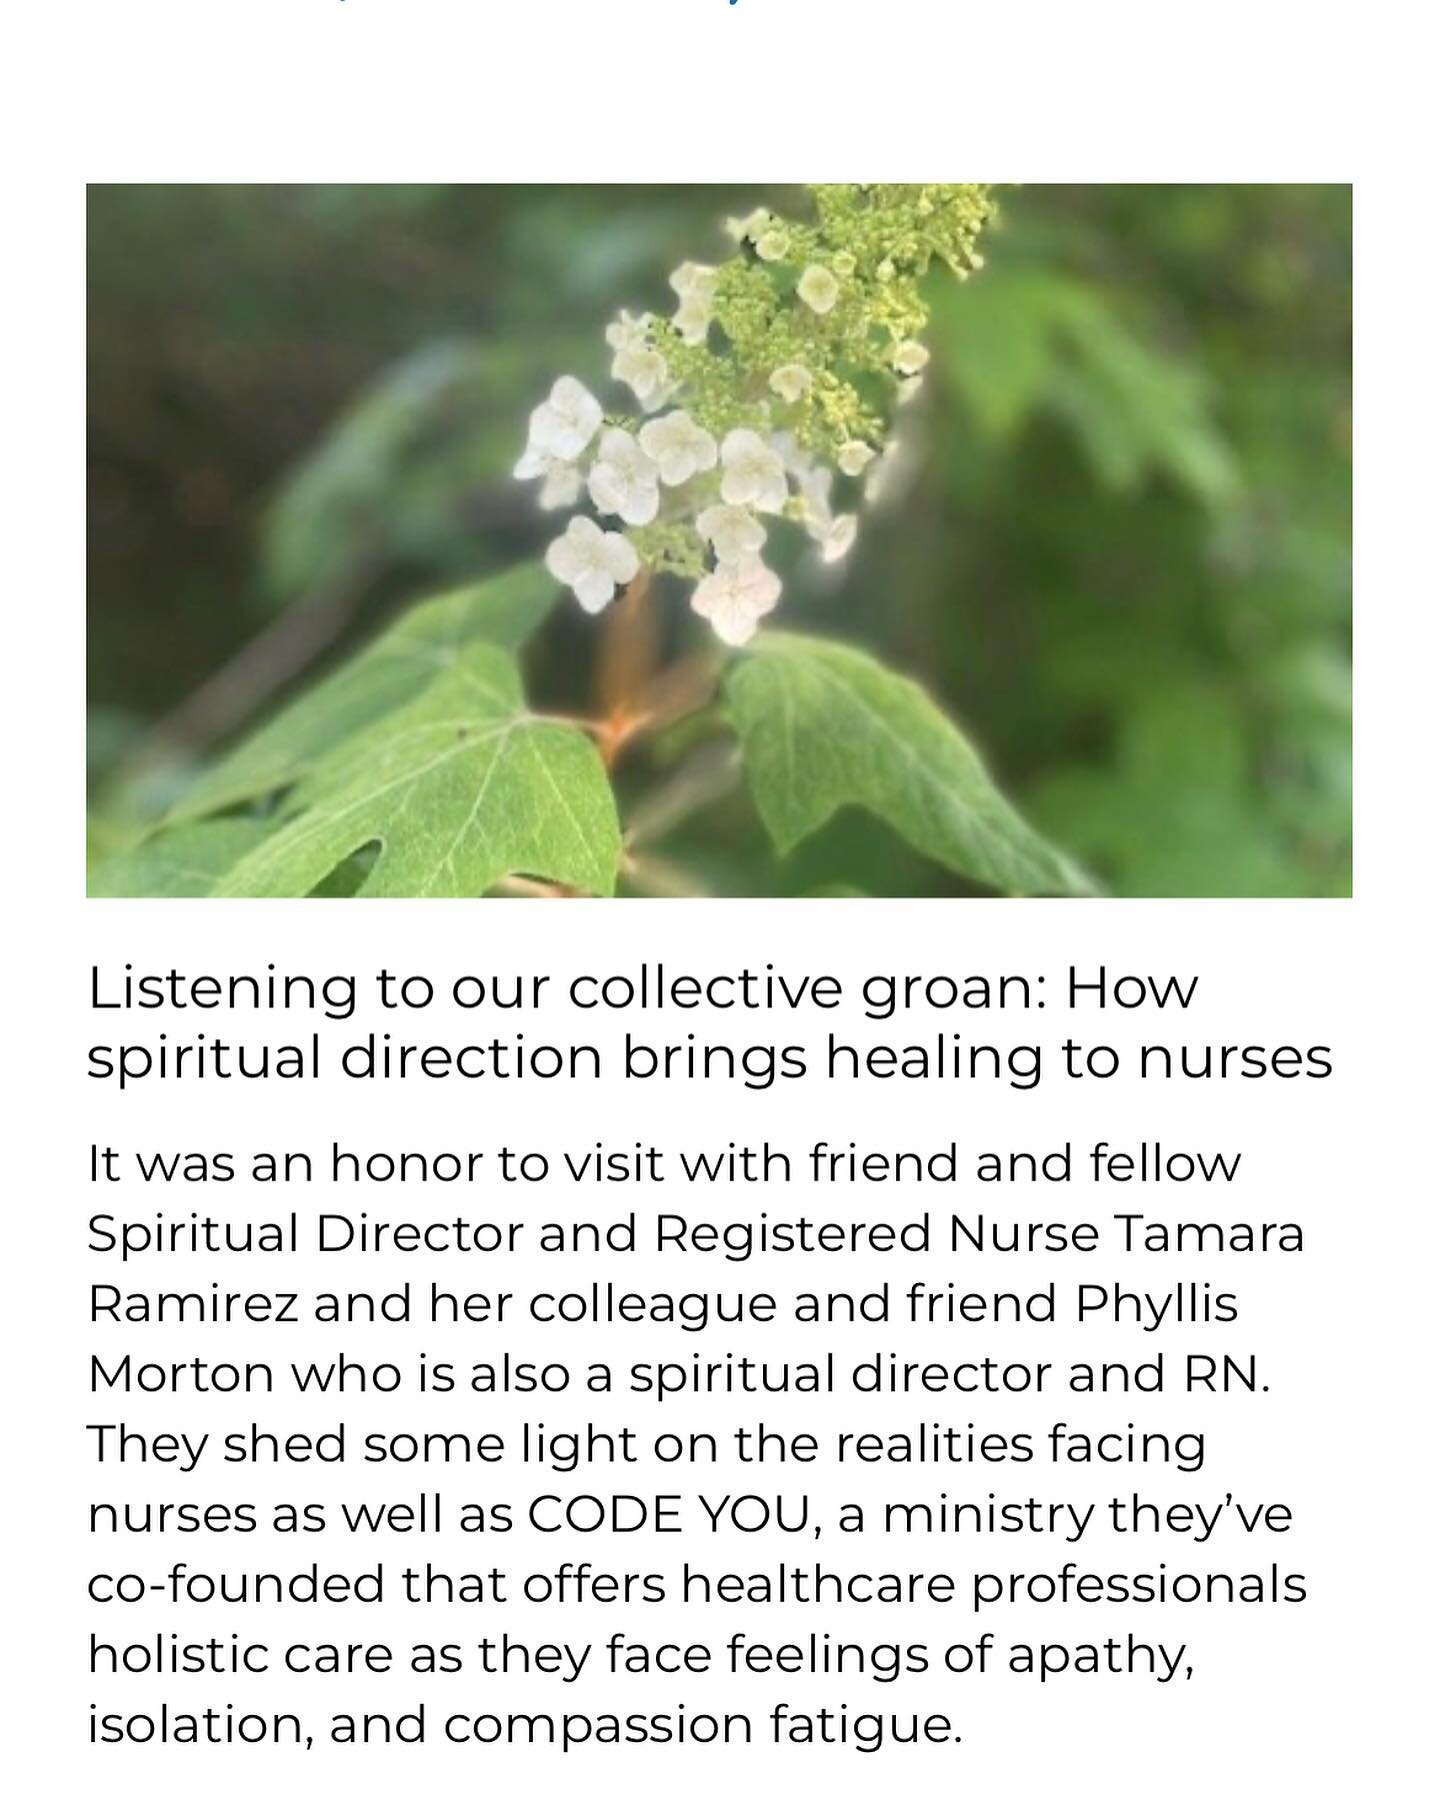 I recently visited with fellow spiritual directors who are also registered nurses.

:
:

They created Code You, a curriculum and toolkit designed to aid frontline healthcare workers with burnout and compassionate fatigue.

{are you a nurse, chaplain,